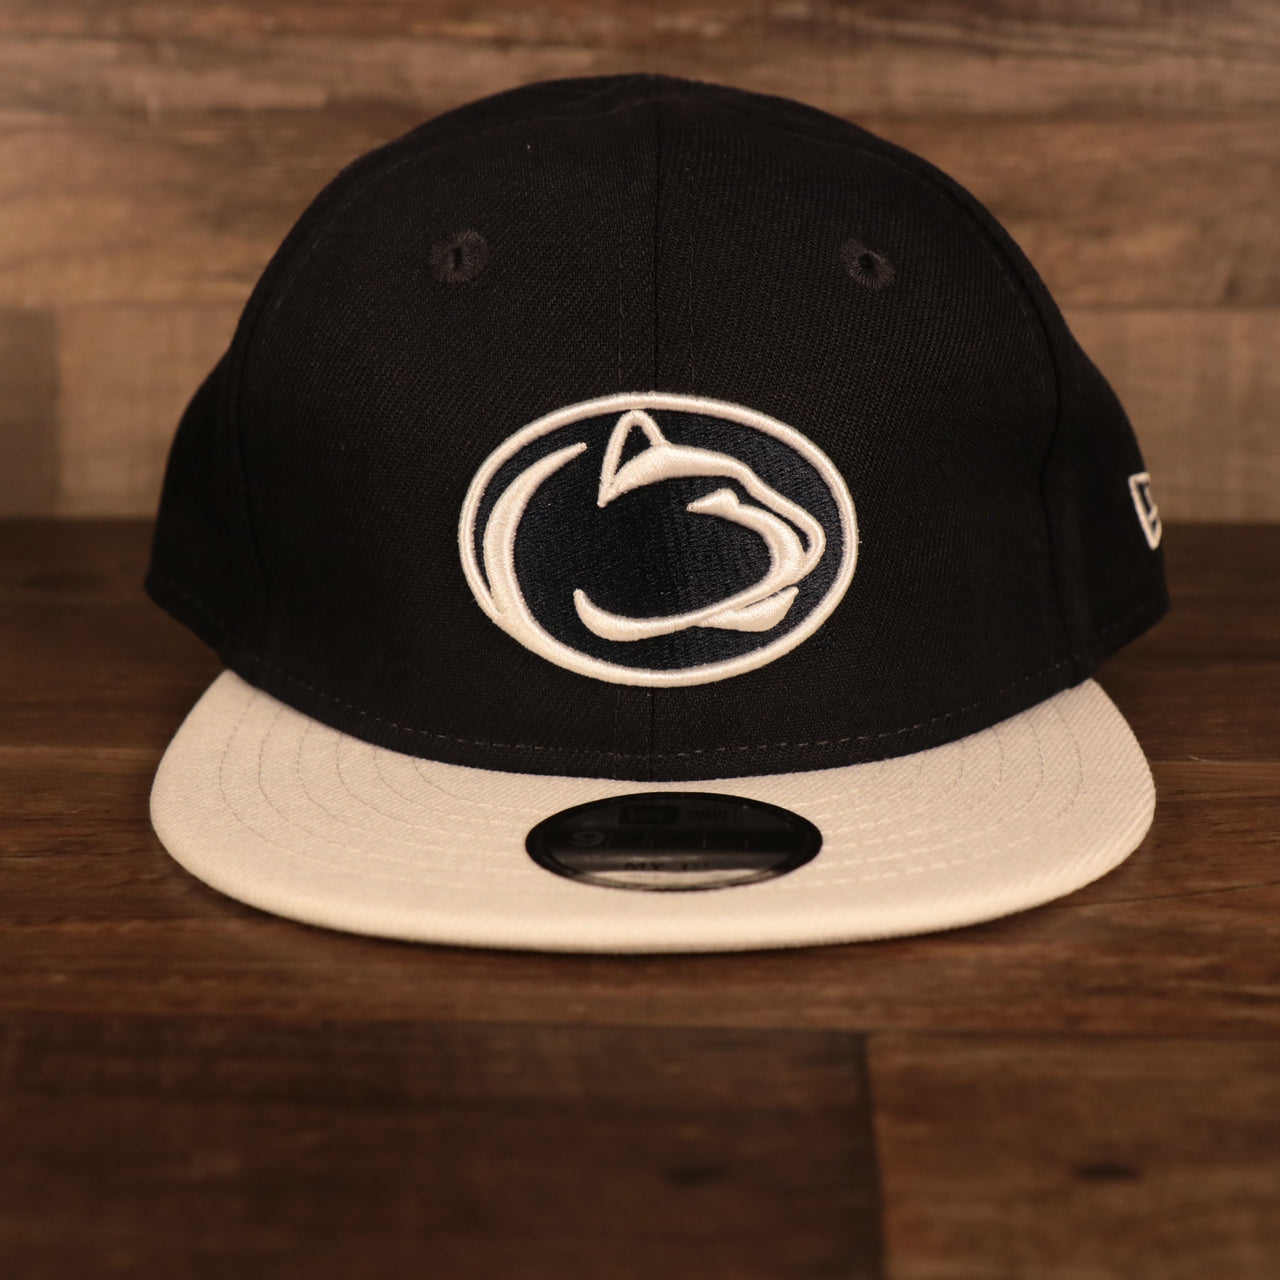 Penn State Nittany Lions My 1st 9Fifty Baby Snapback Hat | Navy/White